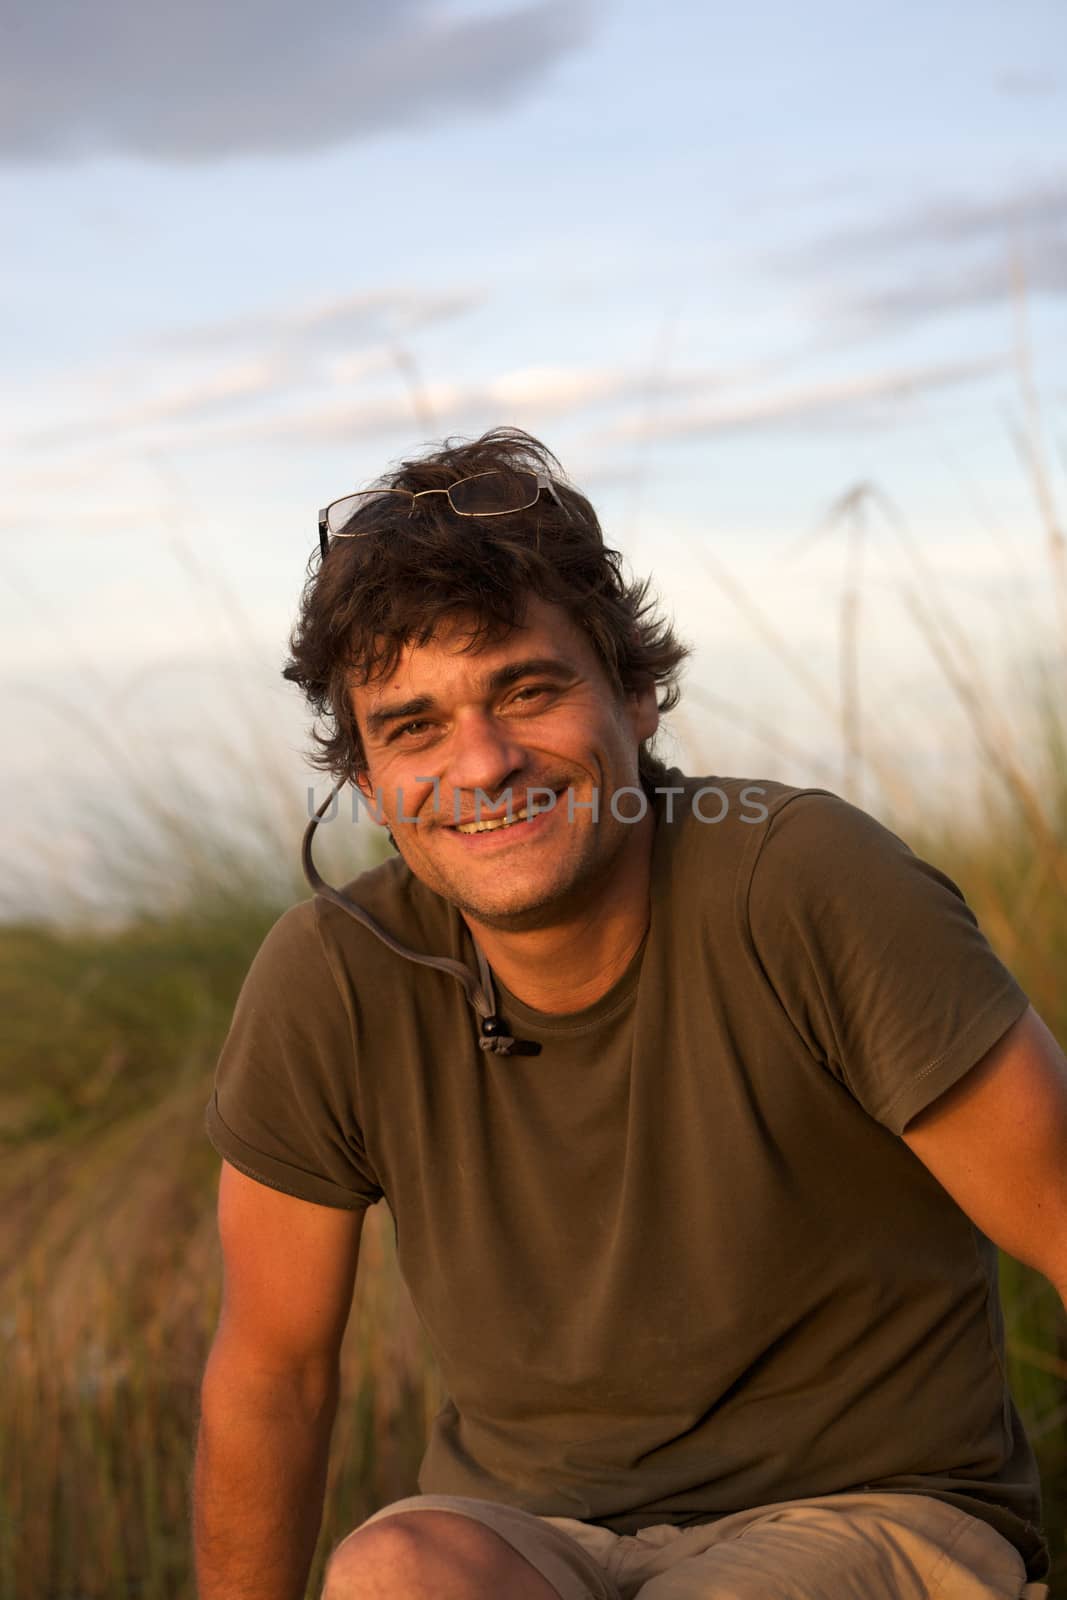 Portrait of an young man sitting on a wooden bench in the Okavango Delta in Botswana